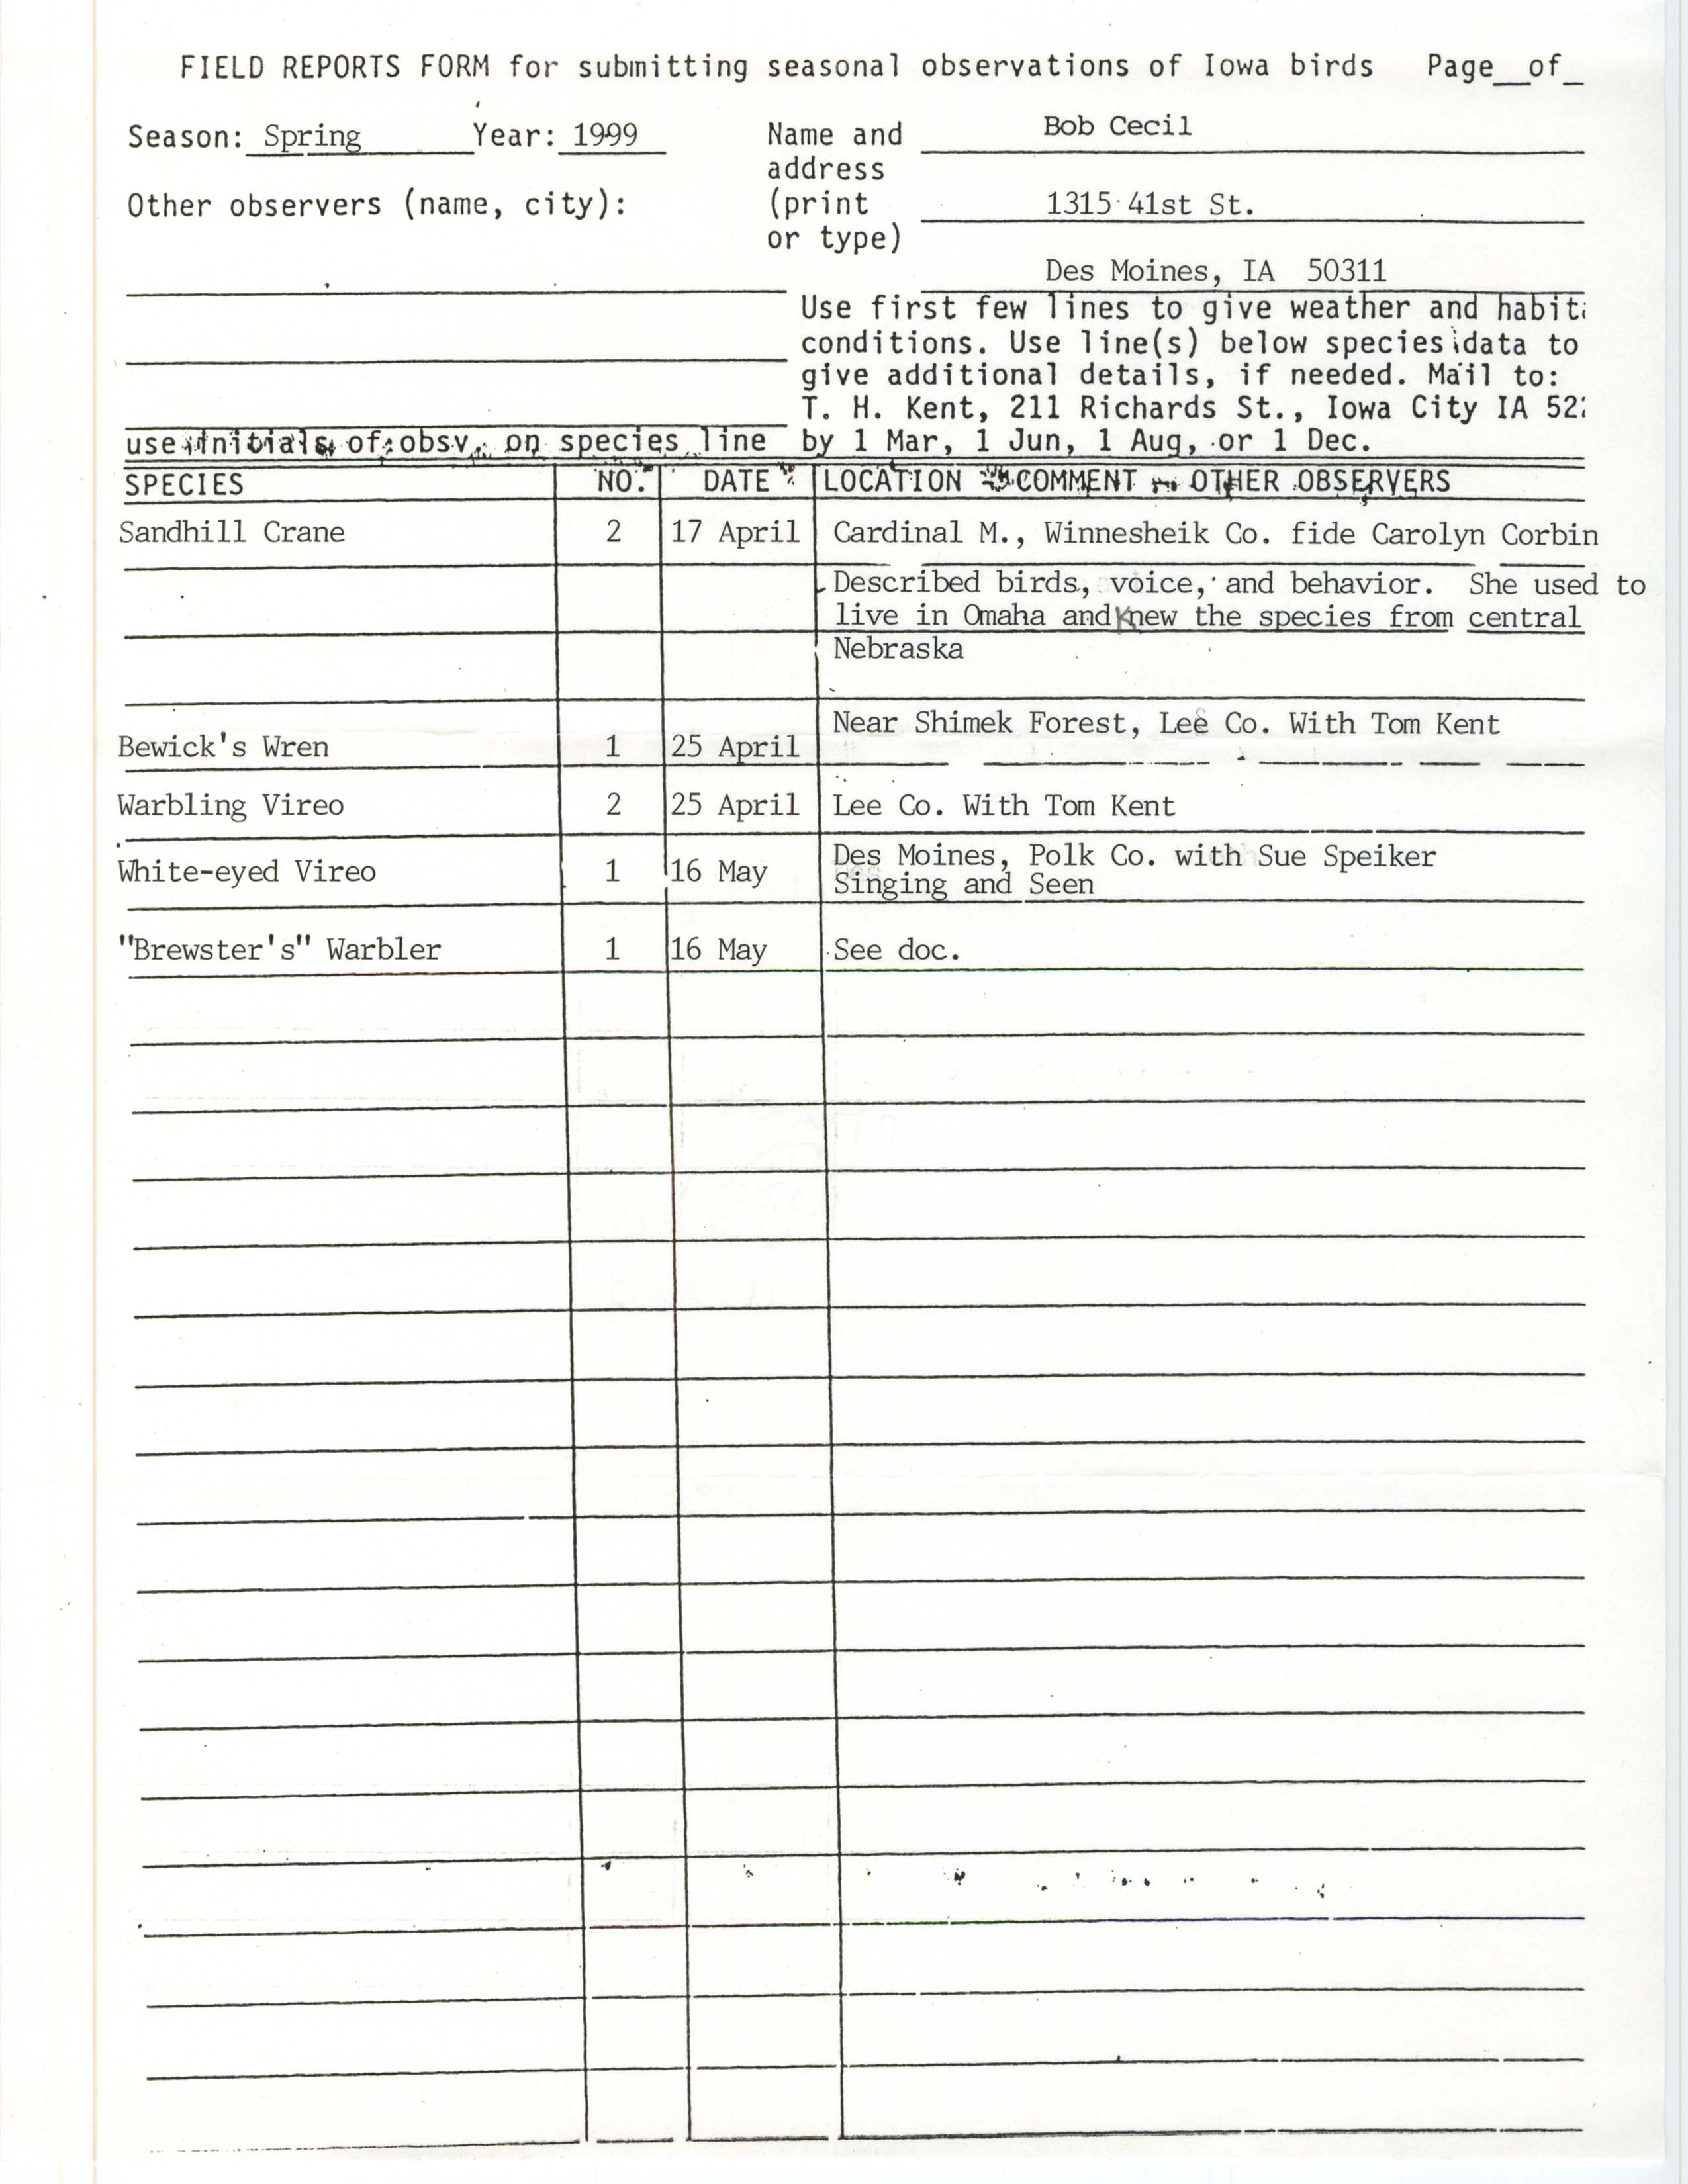 Field reports form for submitting seasonal observations of Iowa birds, Bob Cecil, spring 1999